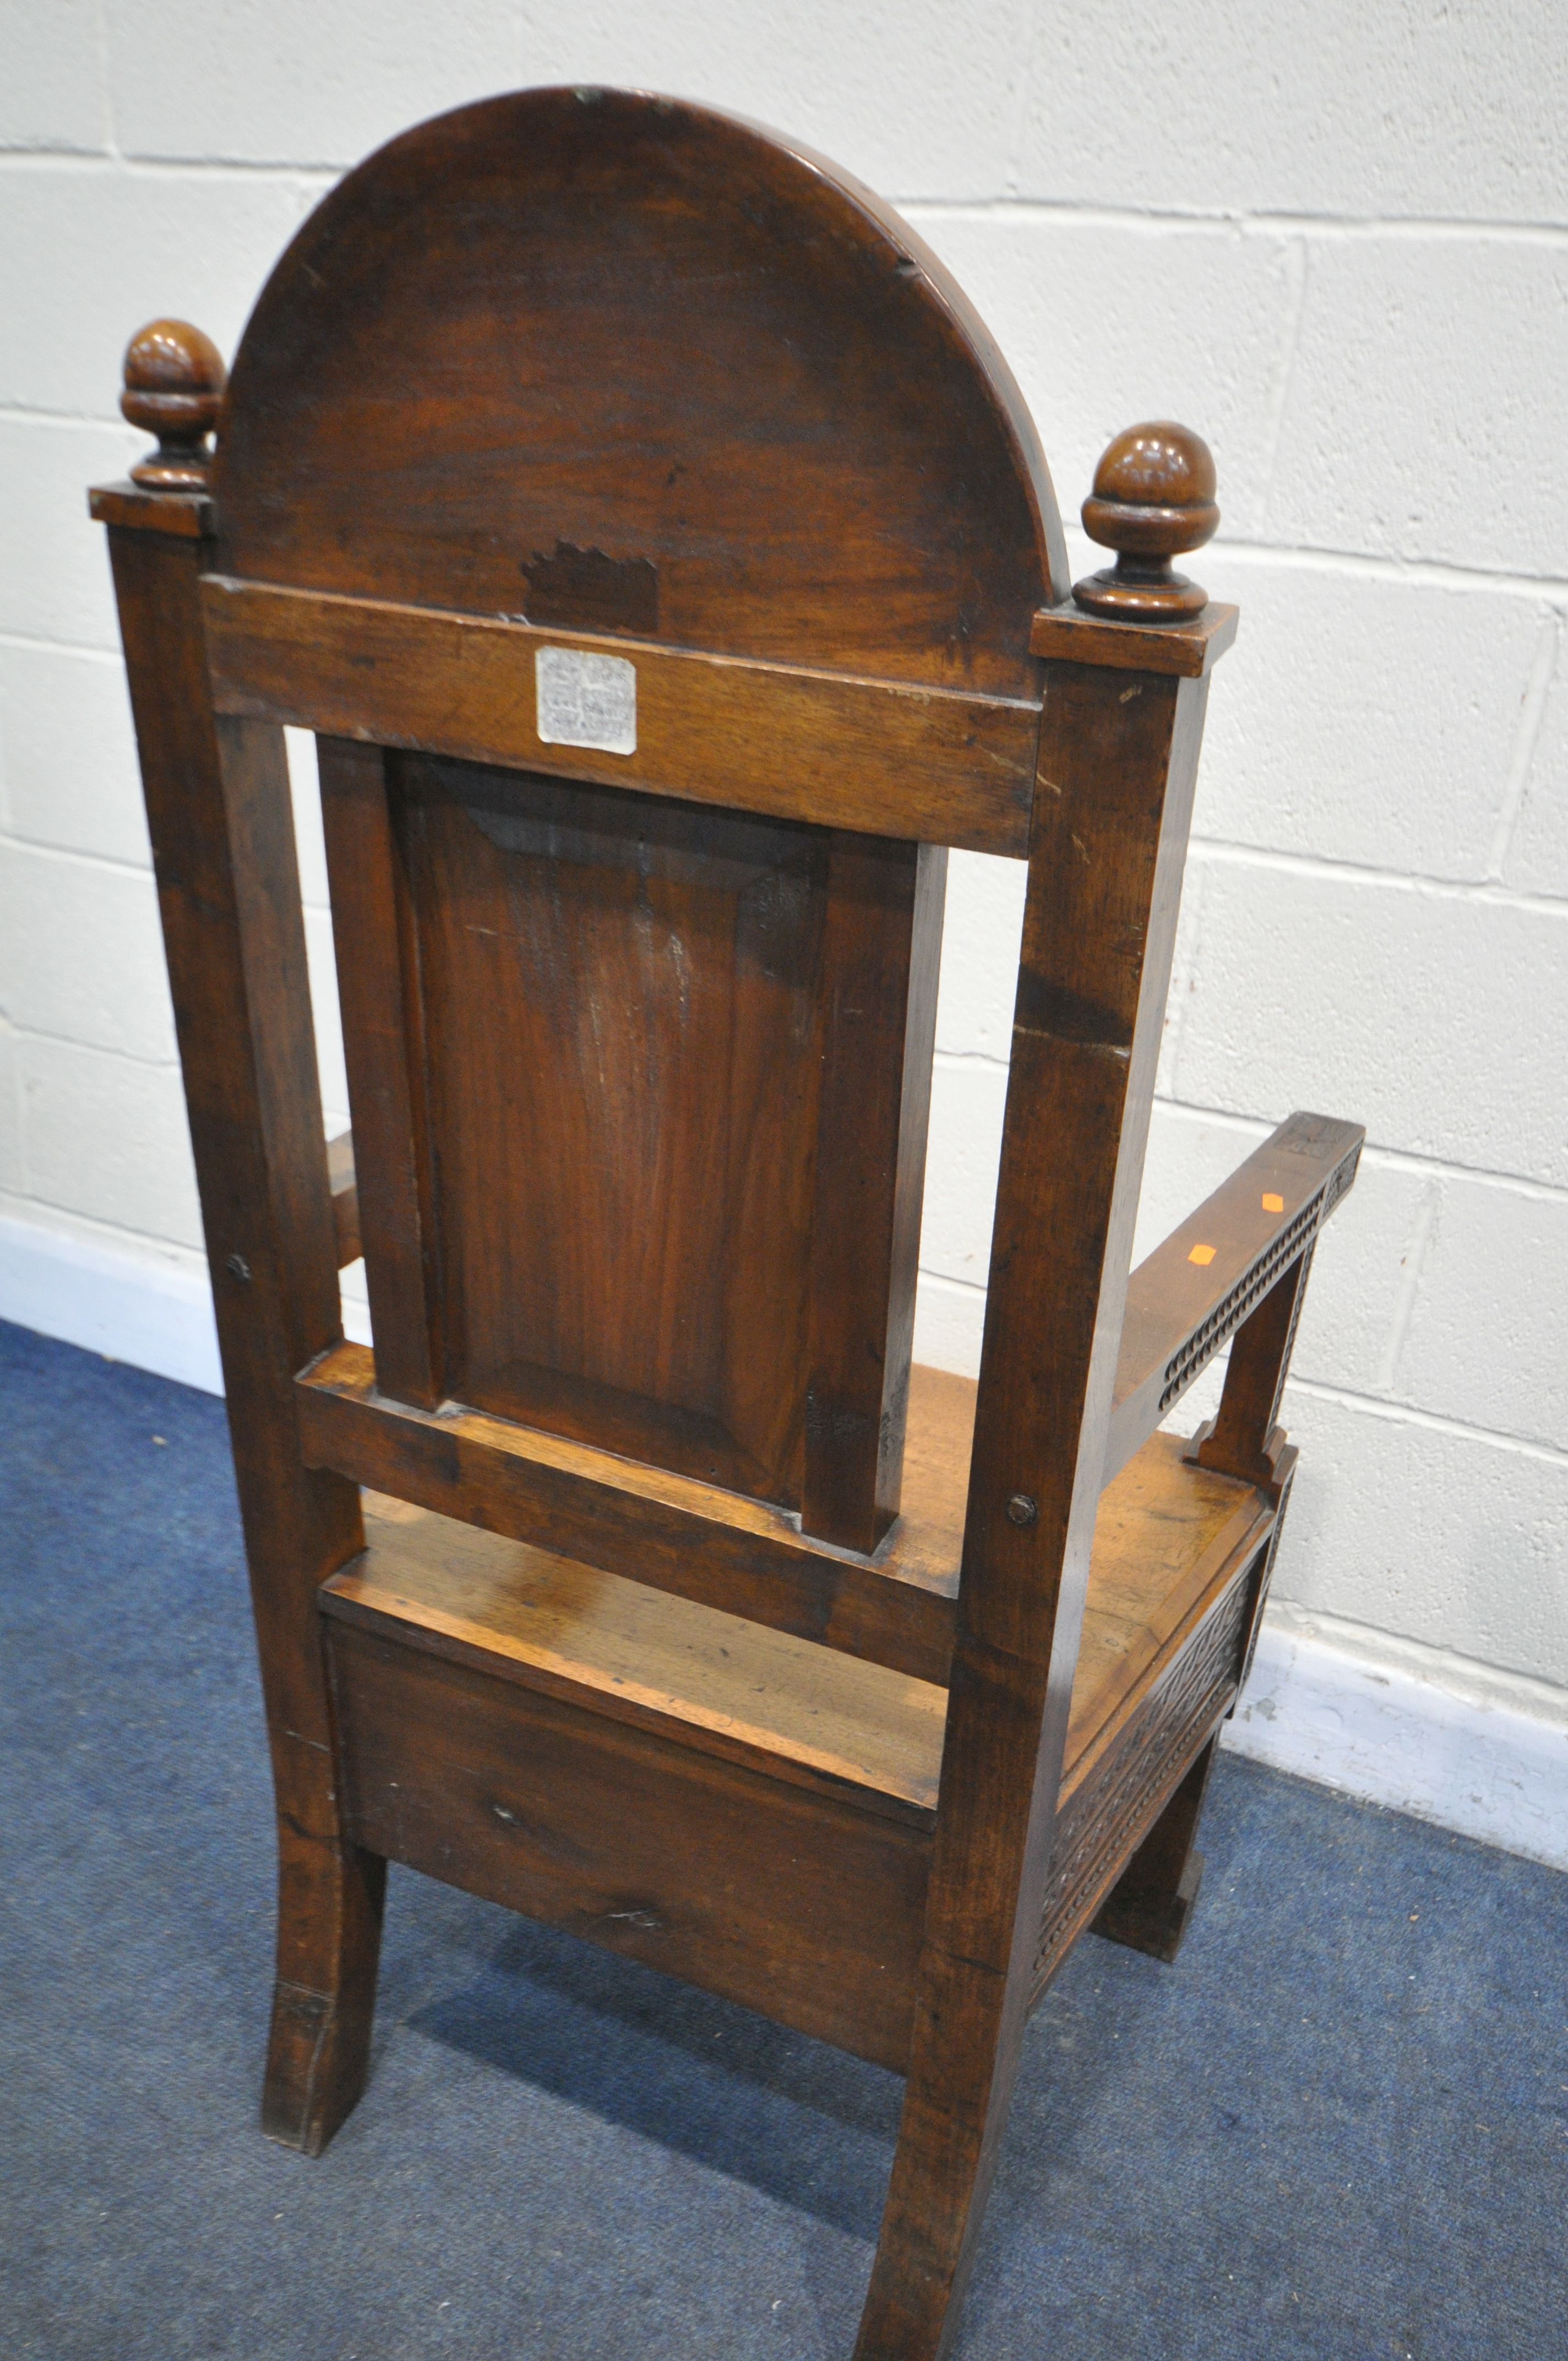 A LATE 19TH/ EARLY 20TH CENTURY CARVED OAK WAINSCOT CHAIR, the arched top depicting - Image 6 of 7